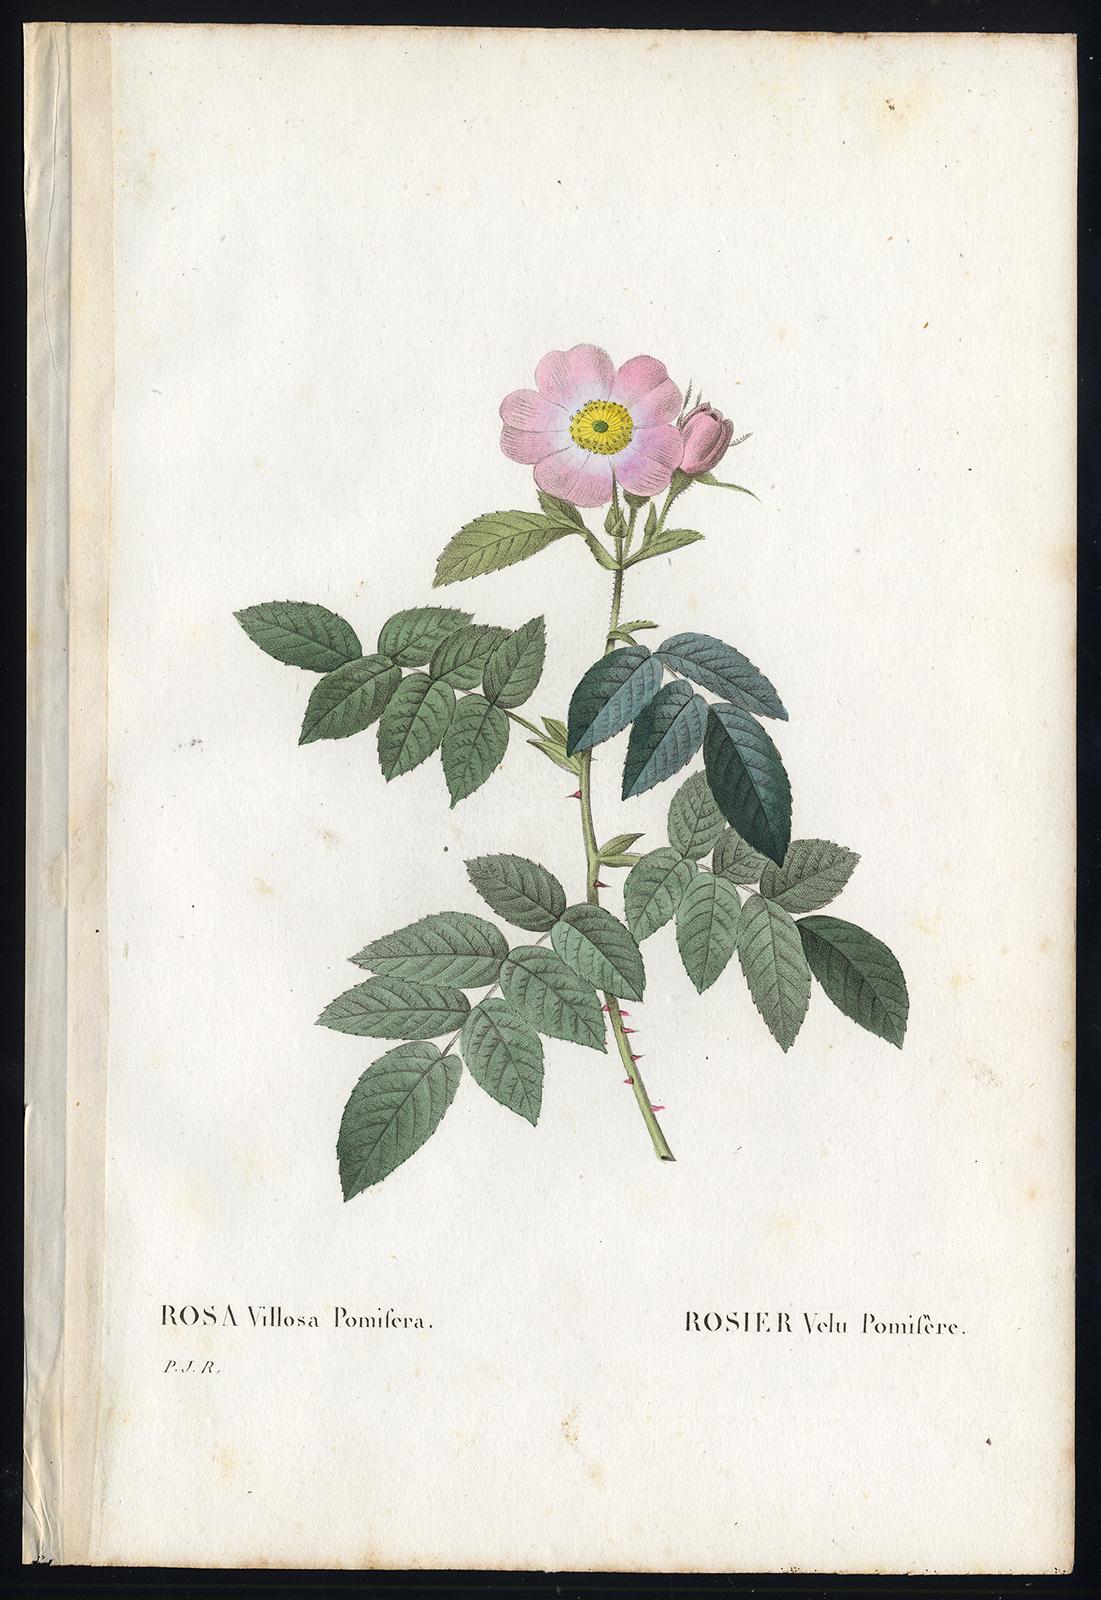 Pierre-Joseph Redouté Print - Apple Rose by Redoute - Les Roses - Handcoloured engraving - 19th century